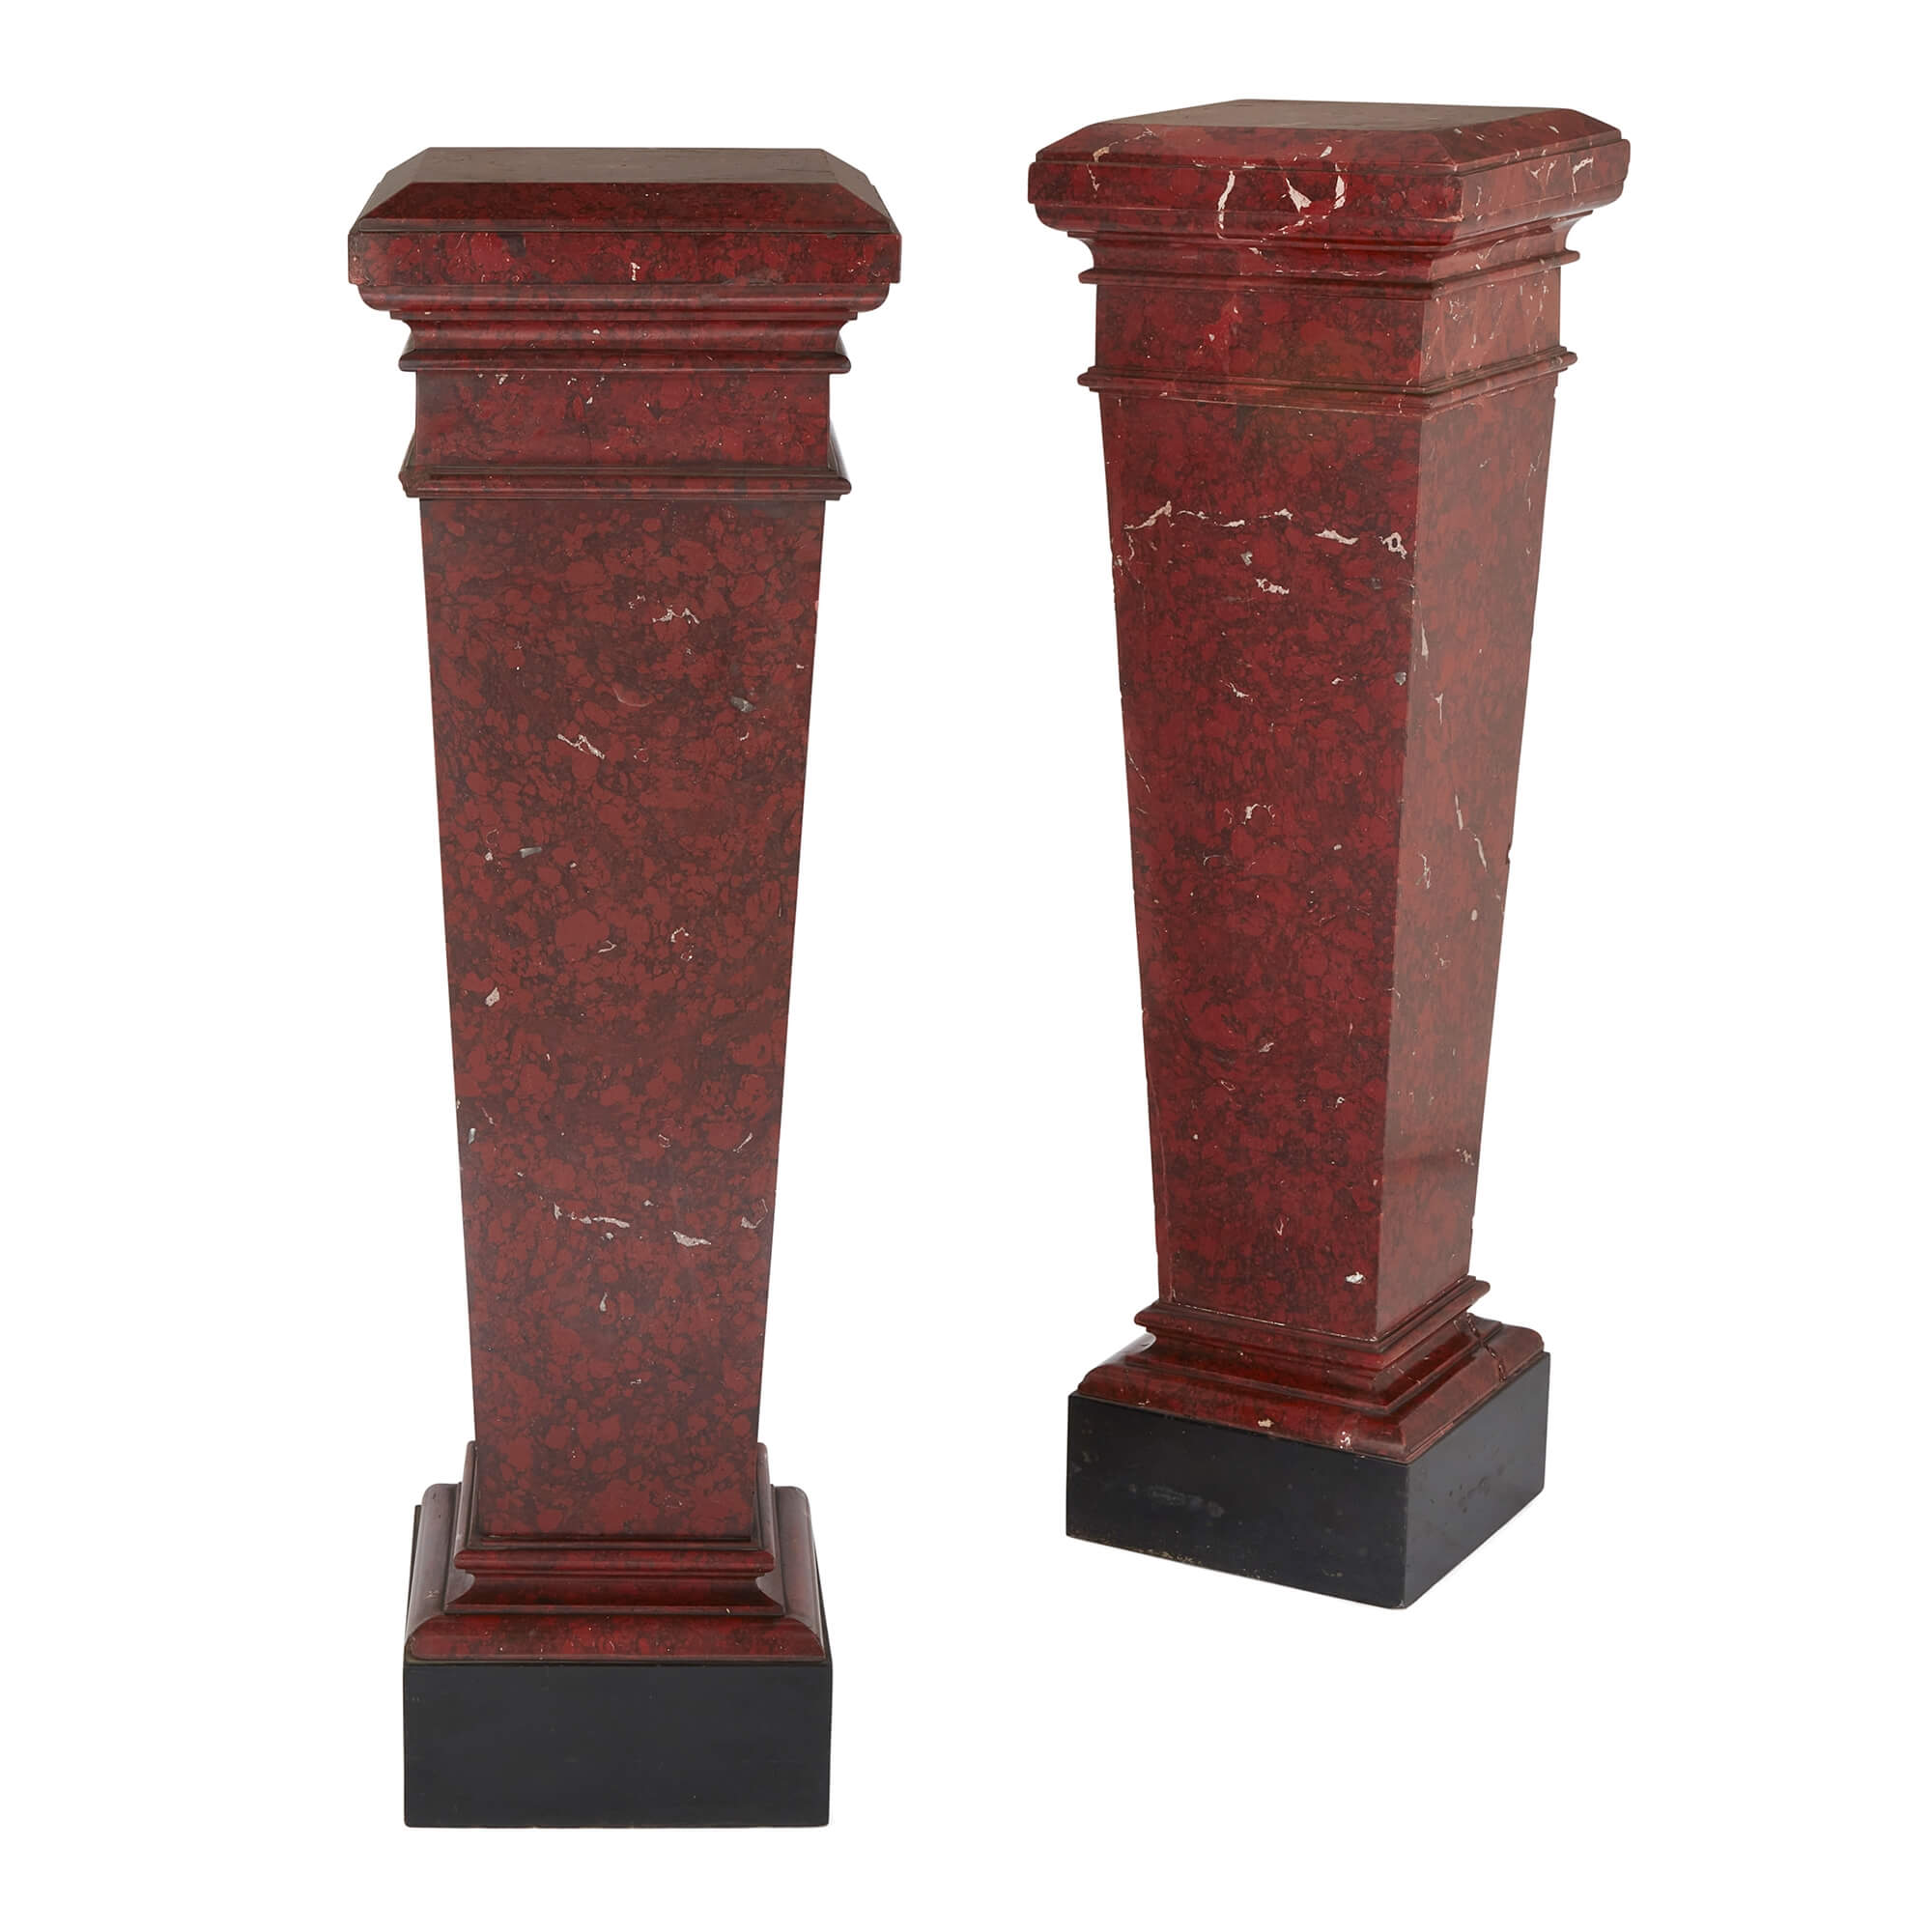 Pair of Red Marble Pedestals in the Neoclassical Style